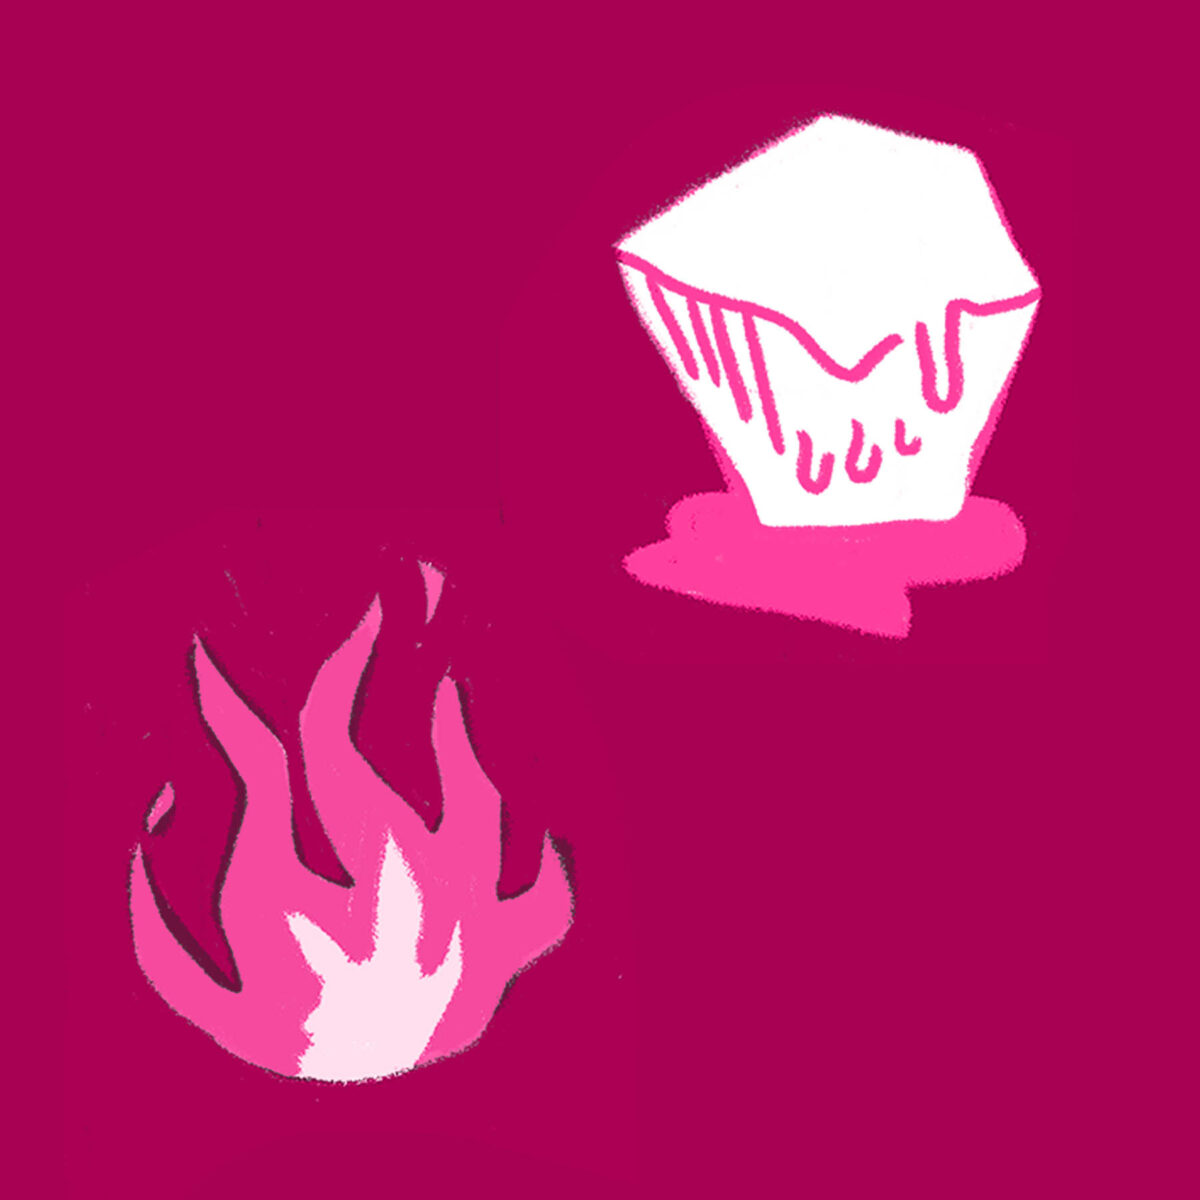 An illustration of a fire and a melting glacier, in shades of pink.